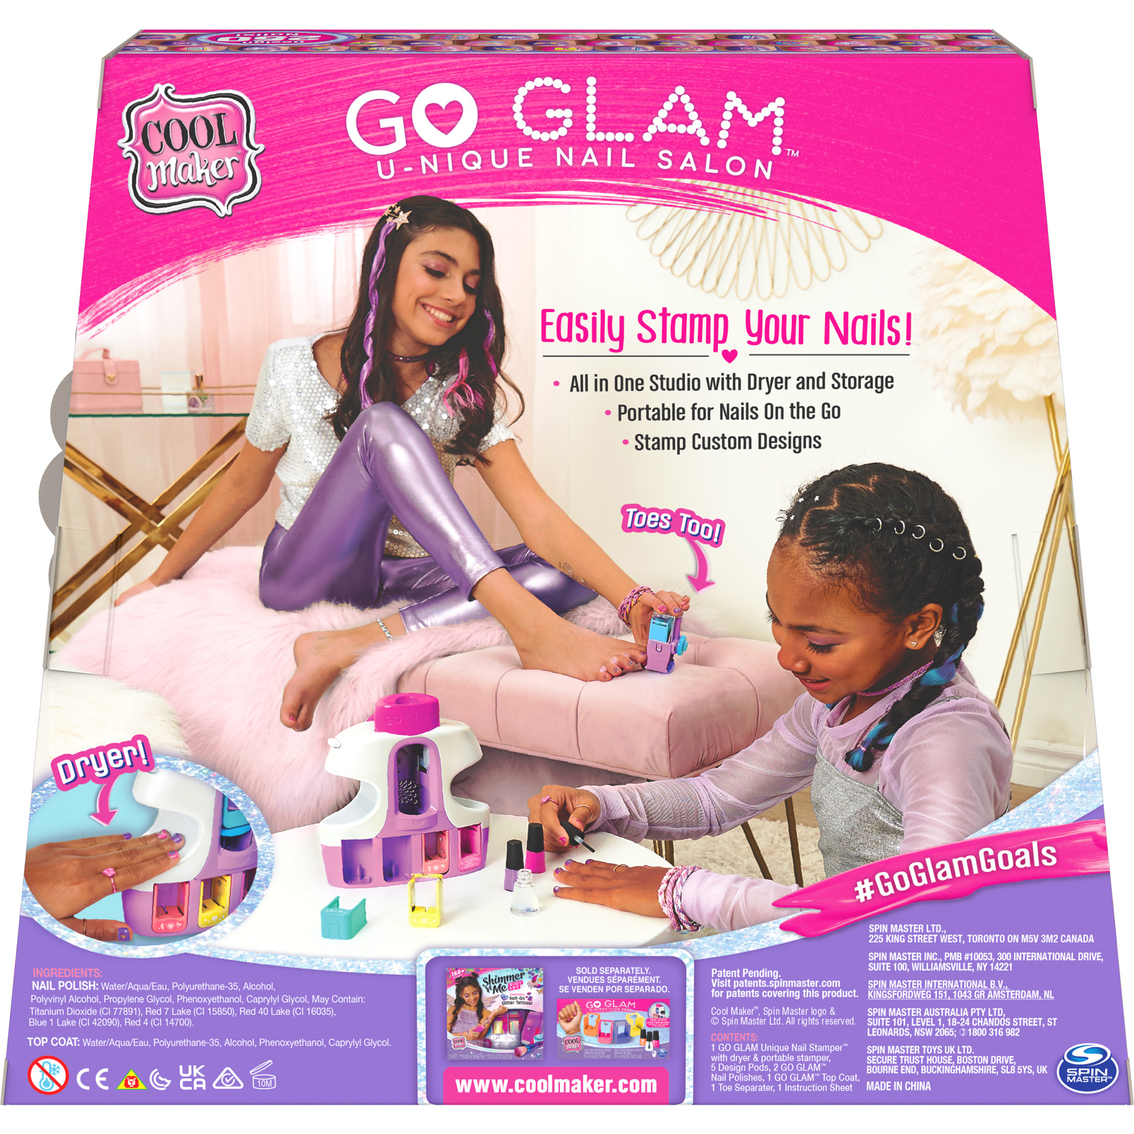 Baby Unique Maker Spin | Play Pretend Master Exchange Toys & | Salon Cool | The Shop Nail Glam Go